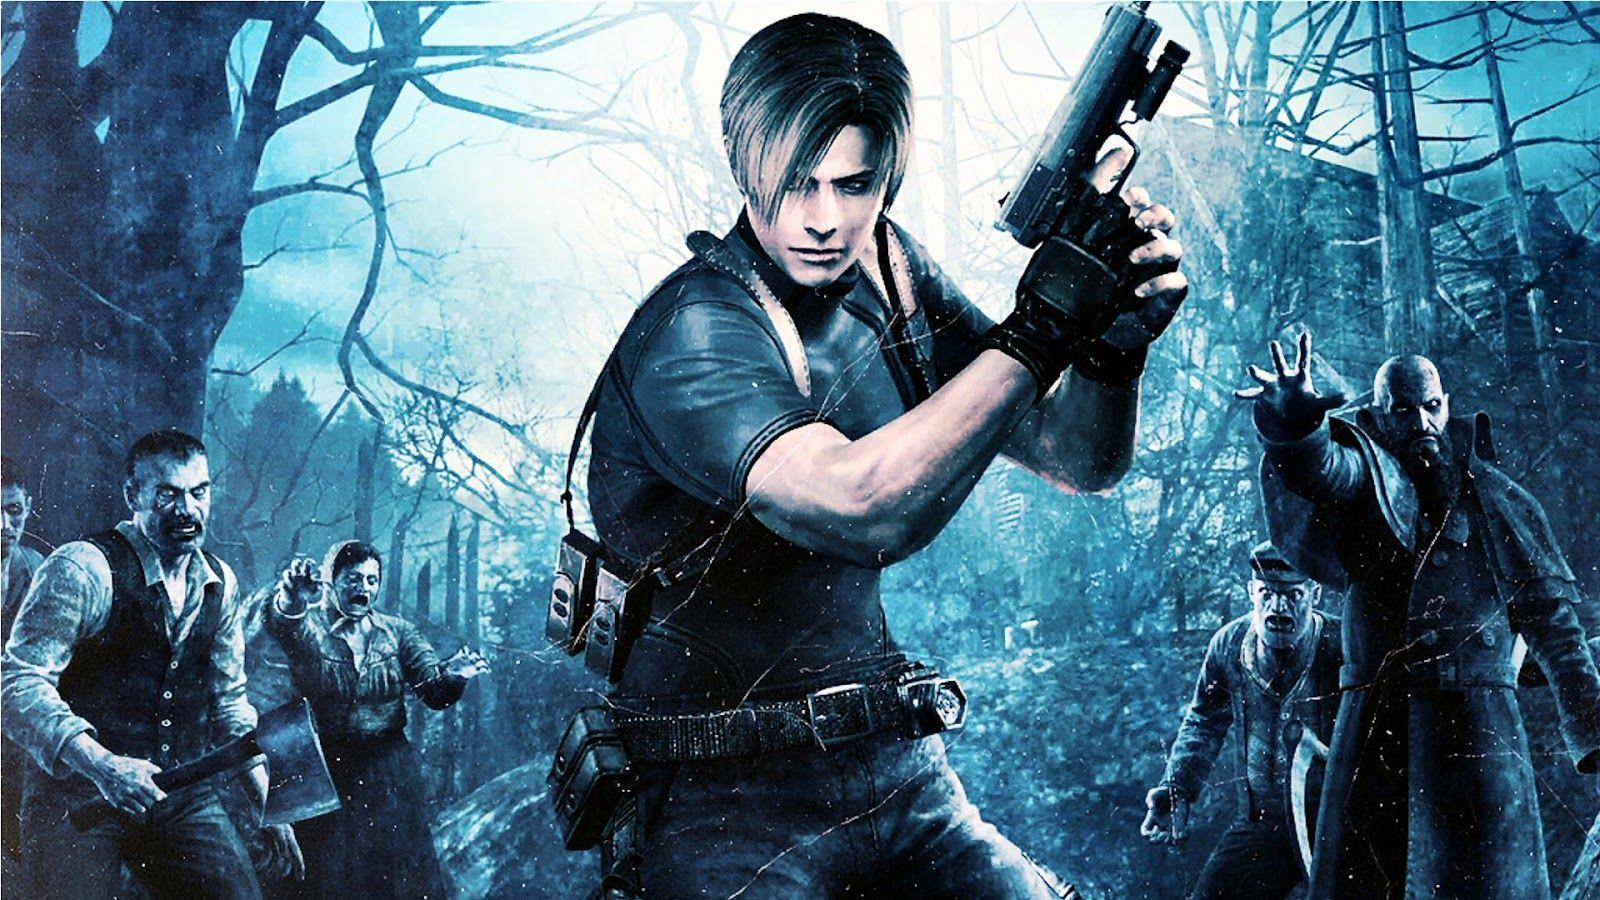 Resident Evil probably the best third person shooter out